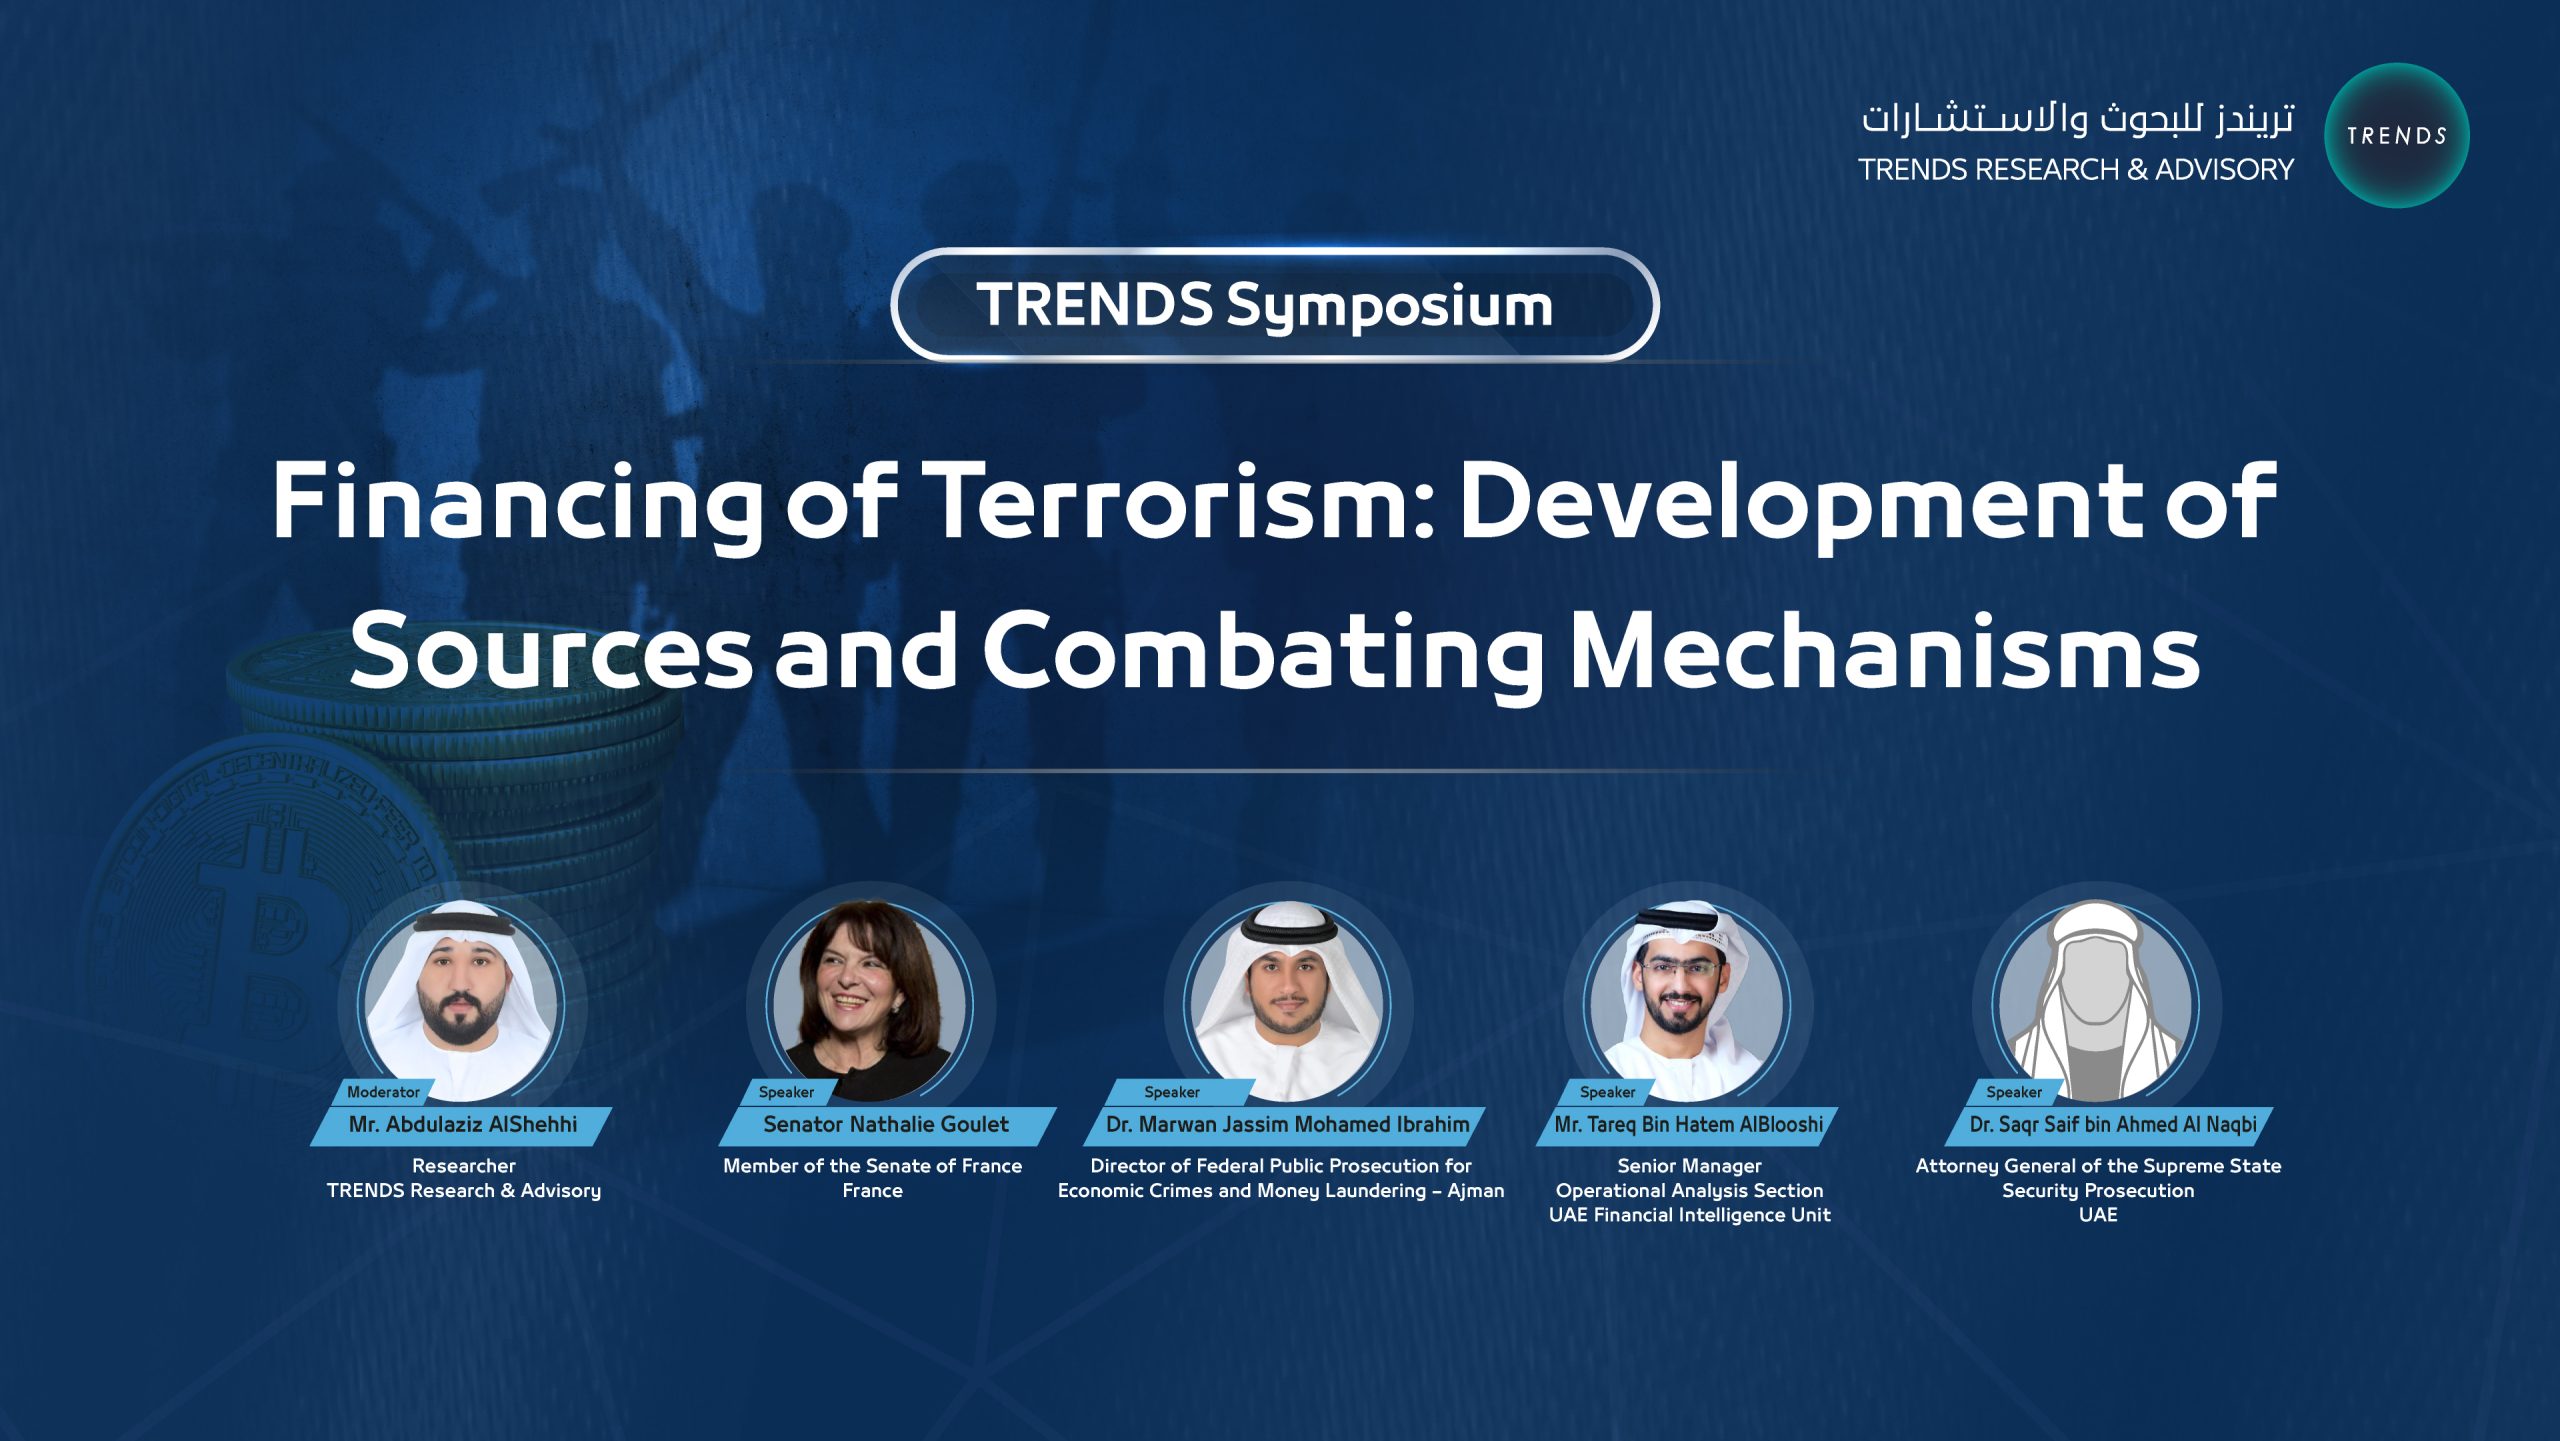 Financing of Terrorism: Development of Sources and Combating Mechanisms